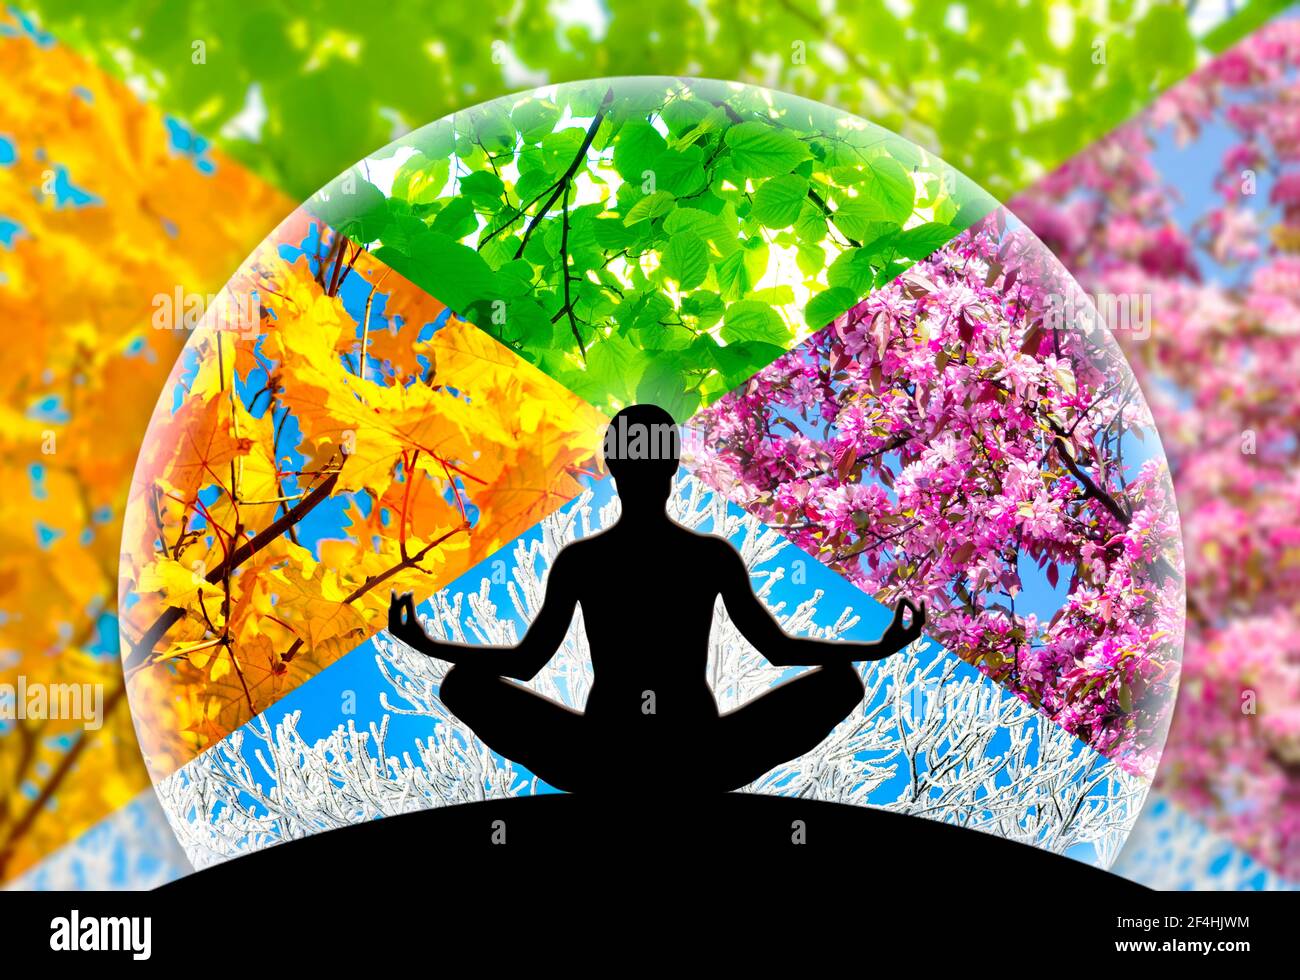 Female yoga figure silhouette against collage of four pictures representing each season: spring, summer, autumn and winter. Stock Photo